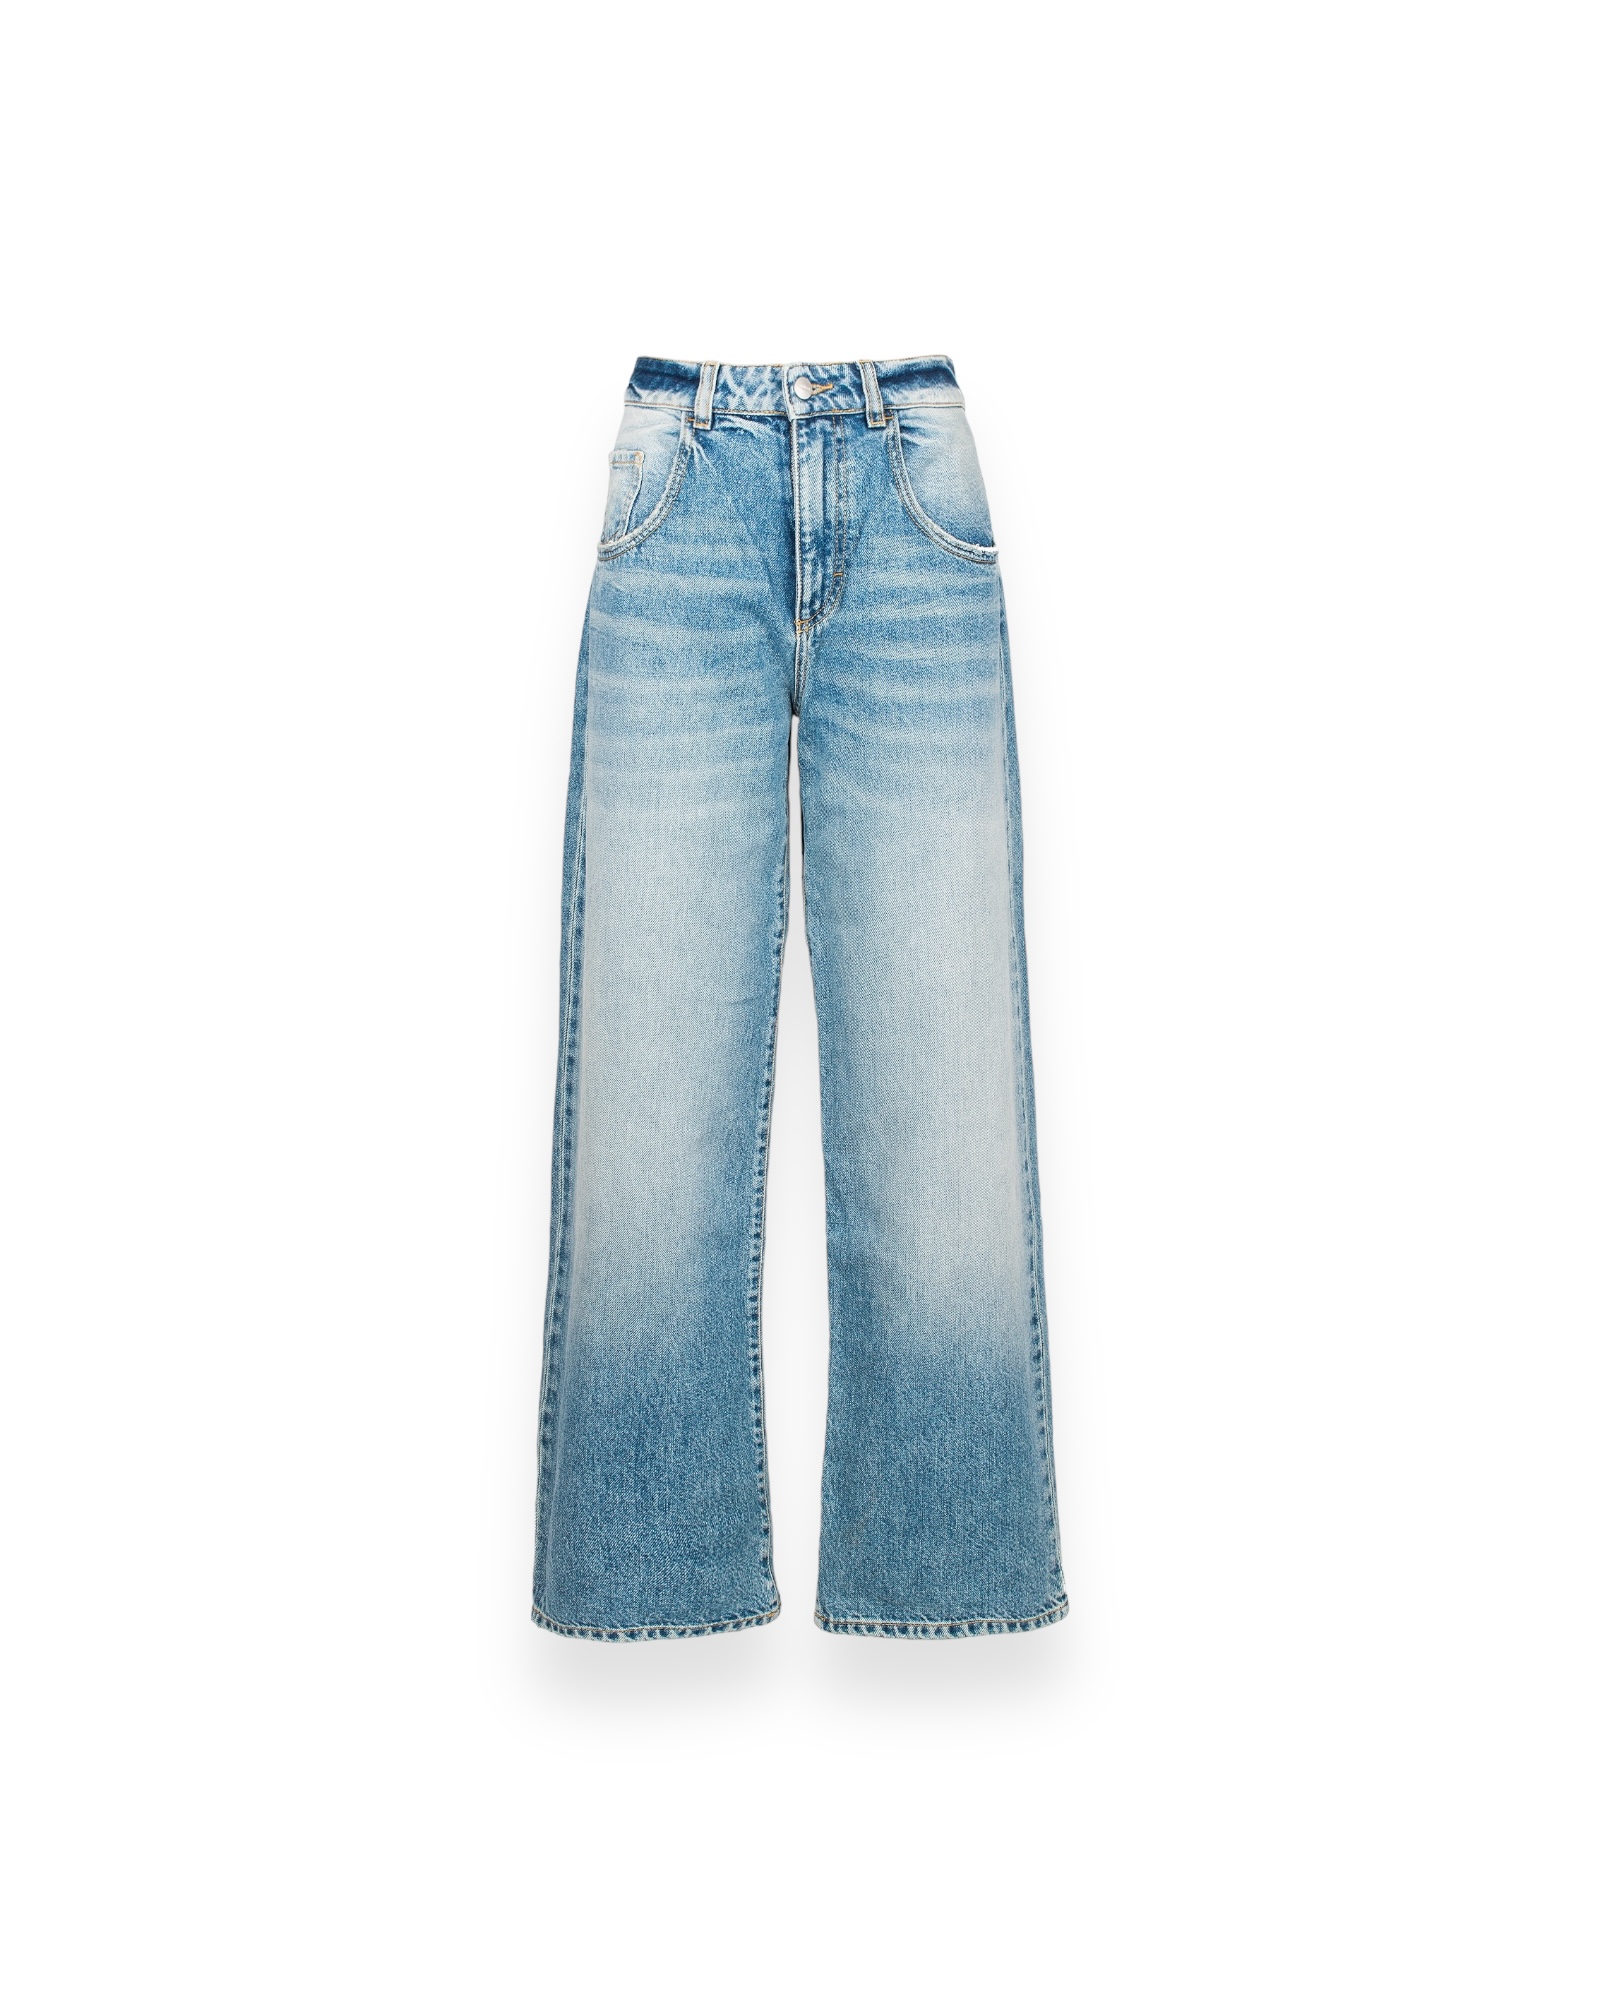 Jeans BEA in washed blue, ICON DENIM,